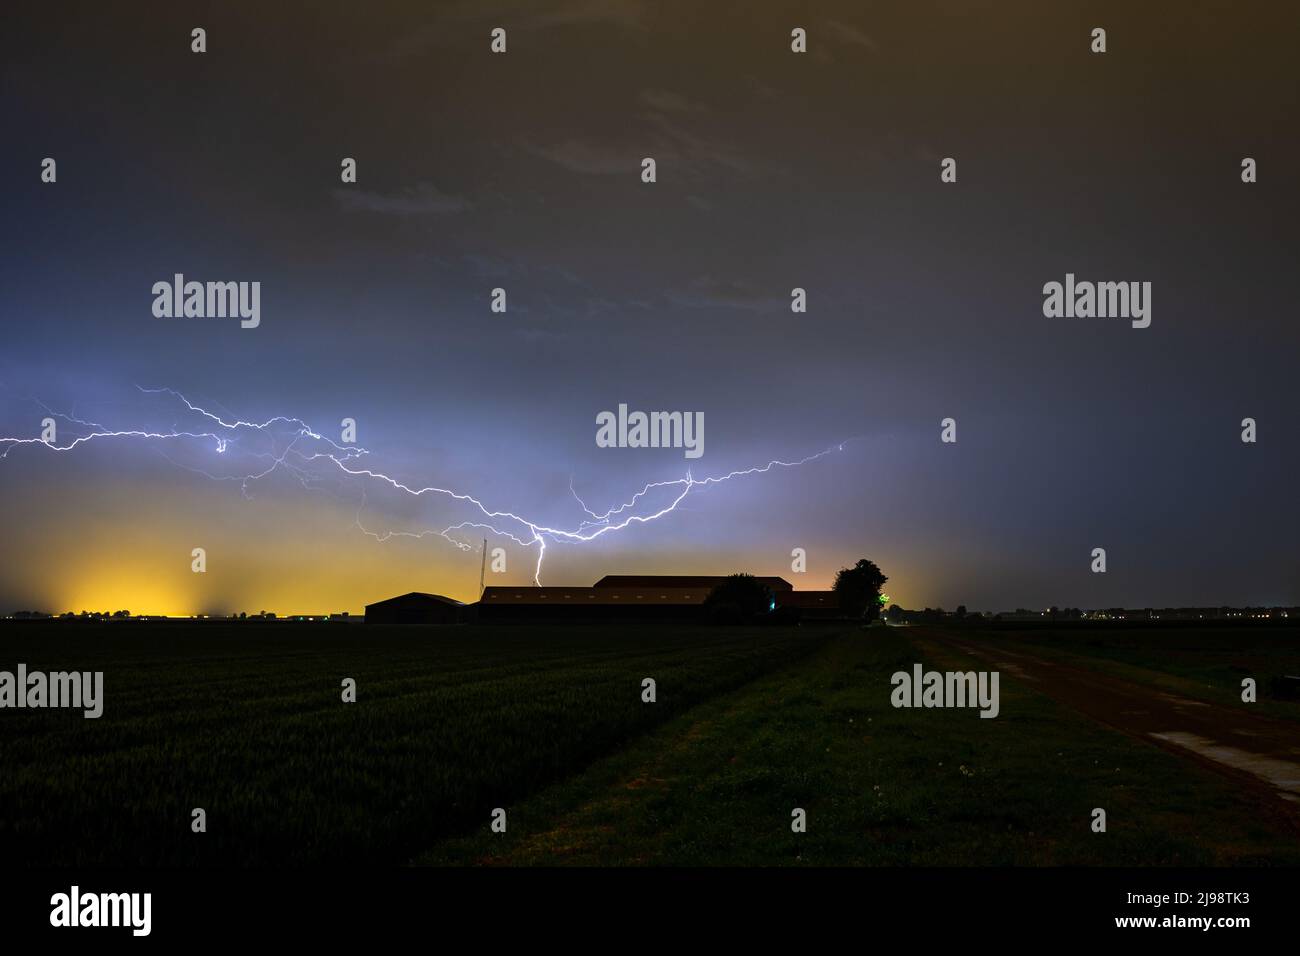 Dramatic image of lightning cleaving the sky above a farm during a thundery night in May. Stock Photo